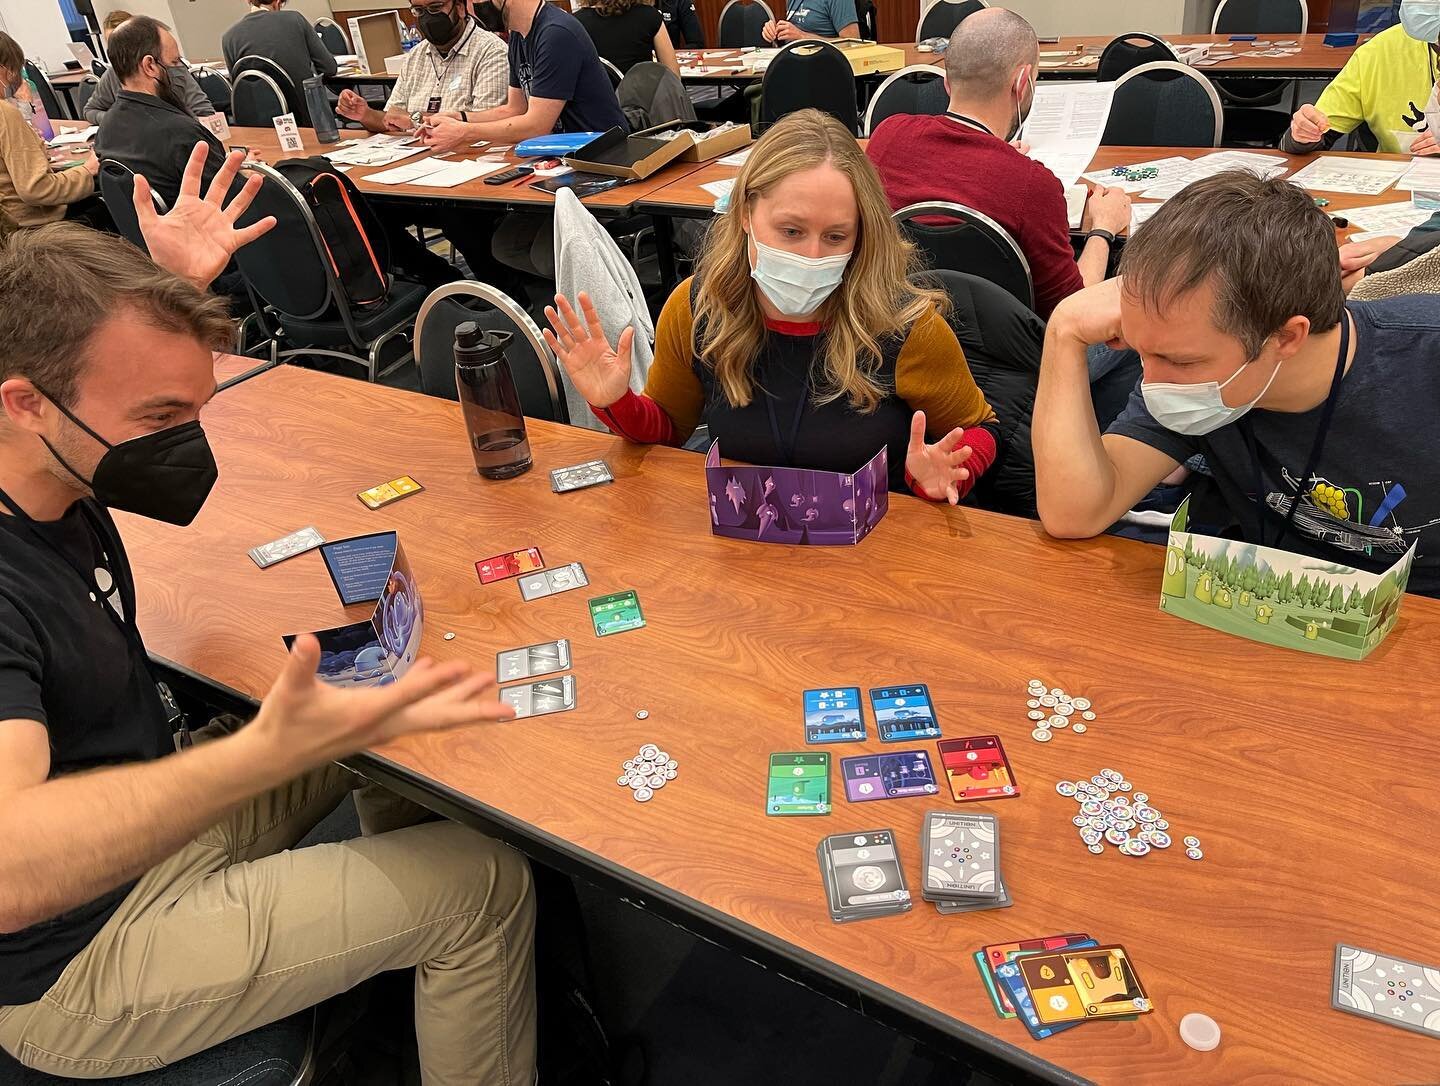 Had a blast demoing Unition at WashingCon this weekend. Thanks to all who played: we enjoyed seeing you folks learn the game, wrap your head around it and figure out your own strategies. And thank you for your kickstarter support! 

We'll be demoing 